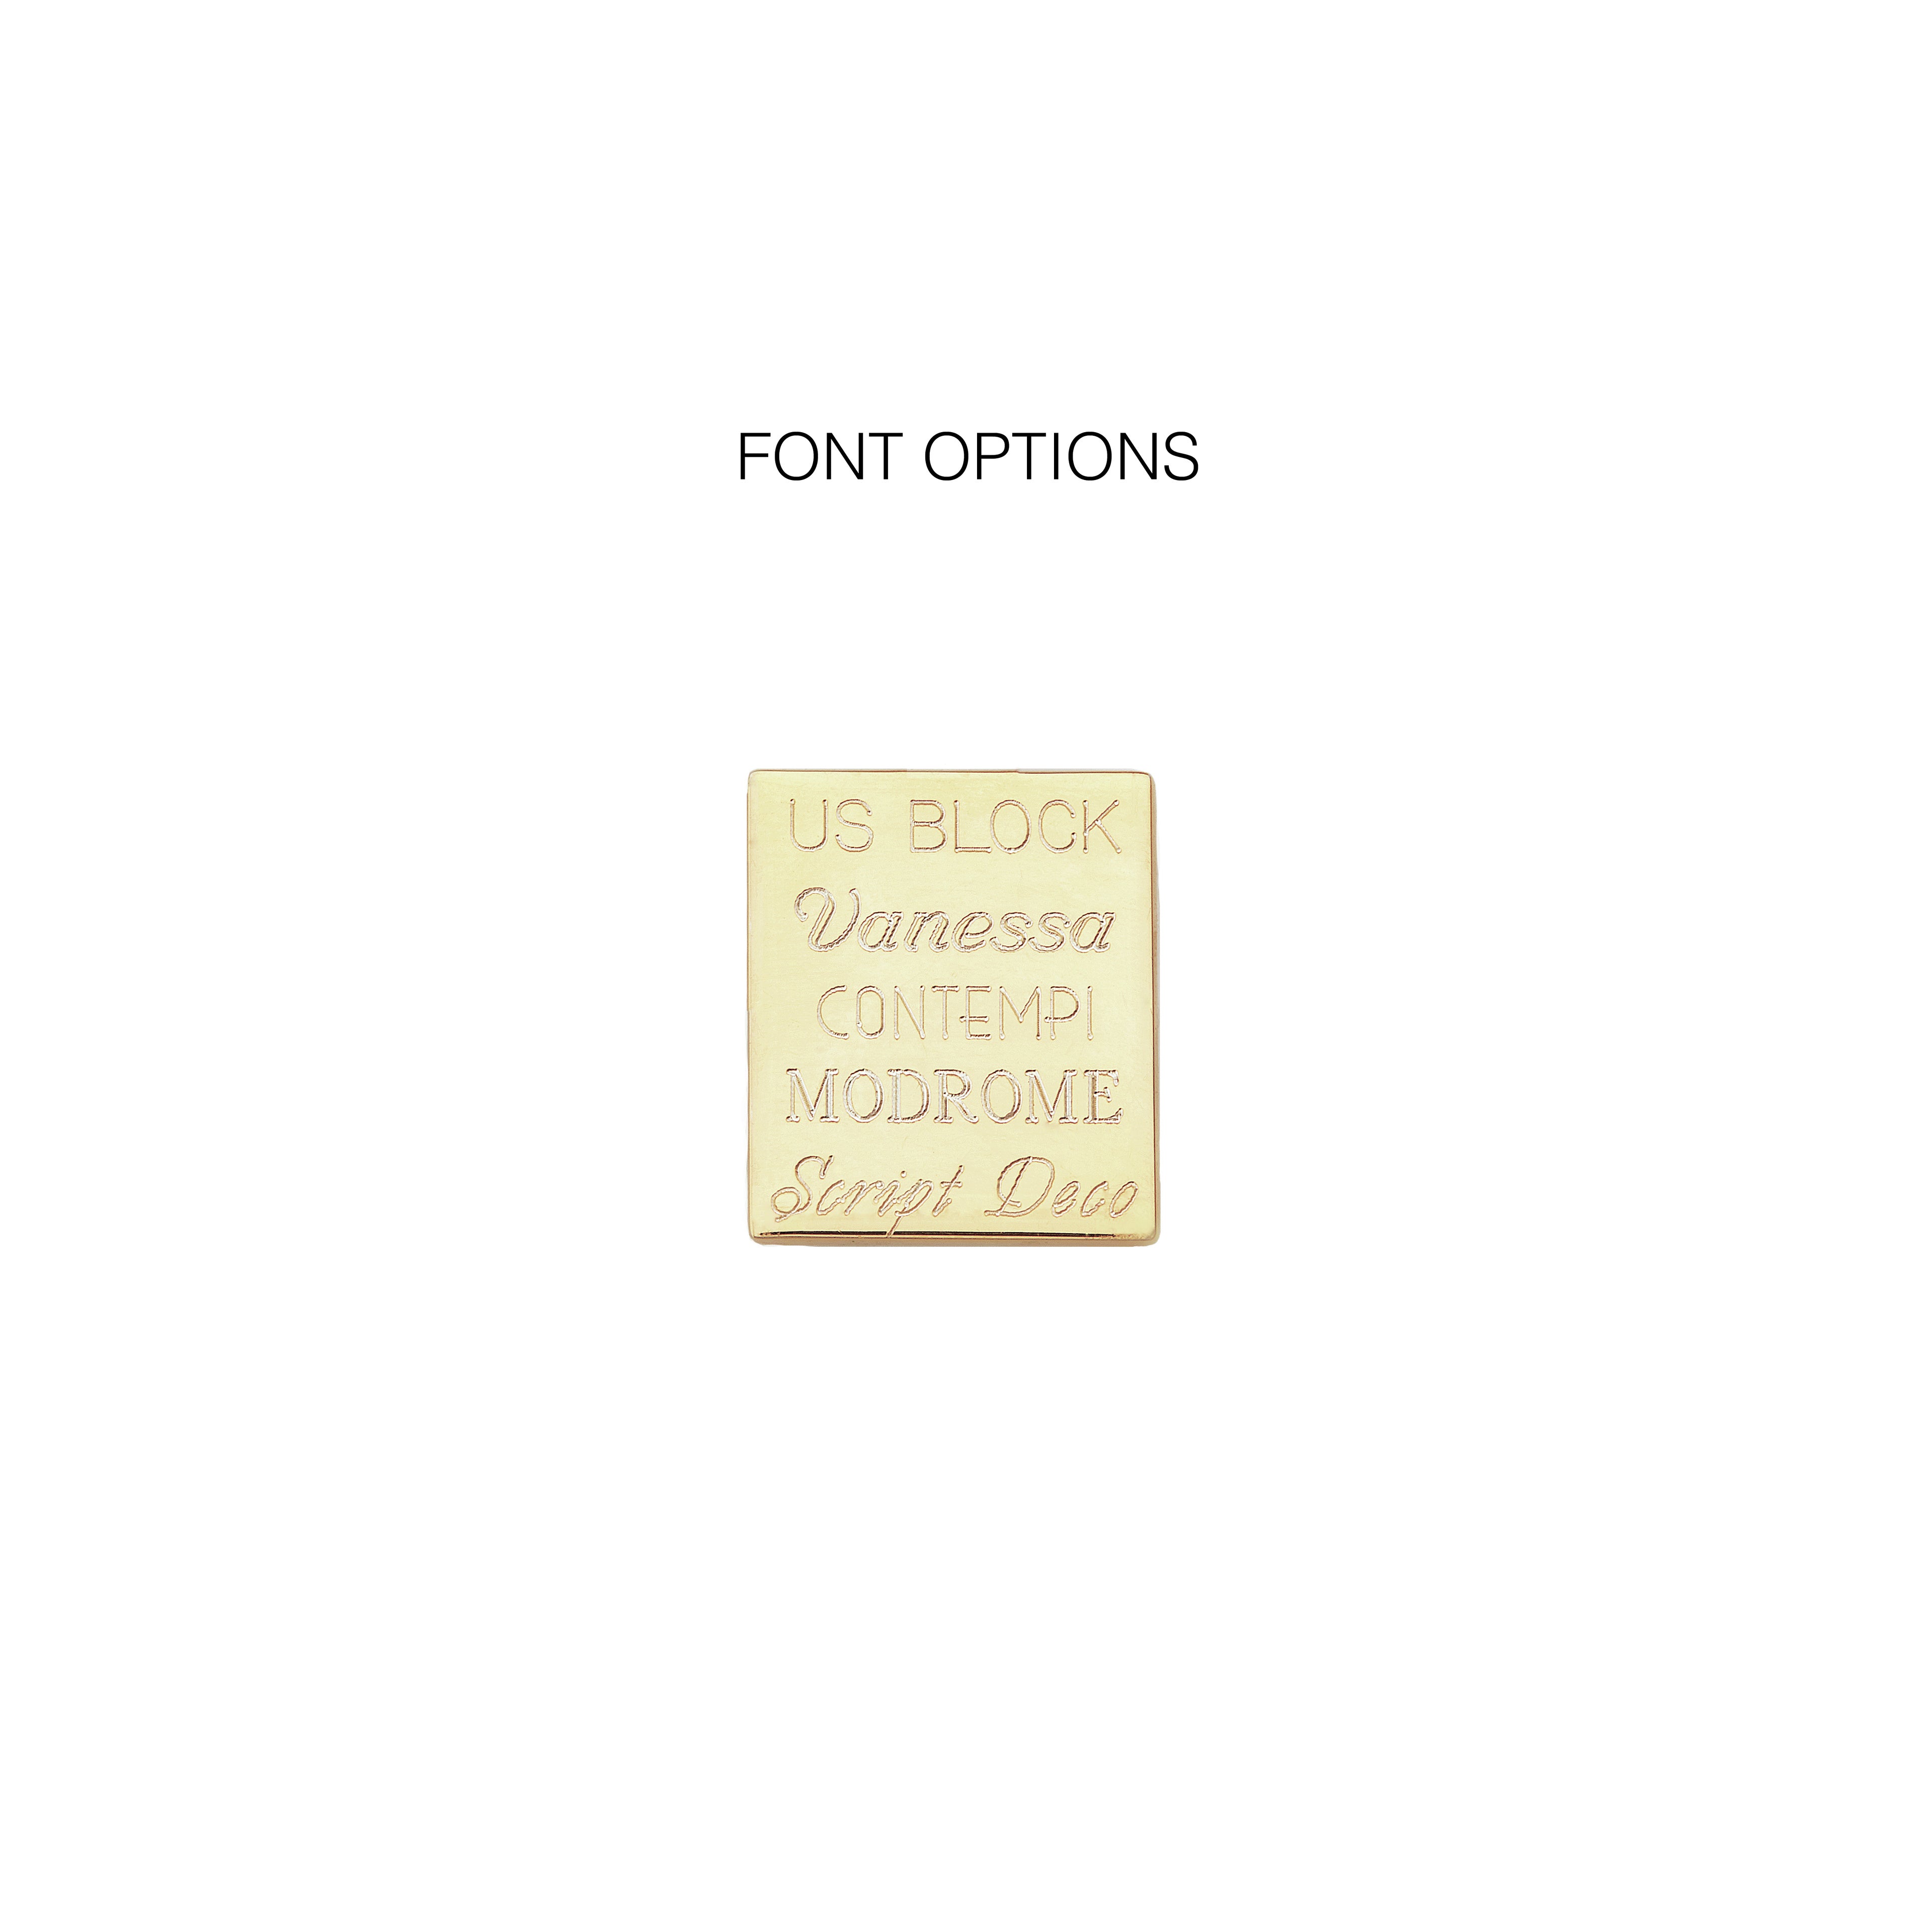 Font names written in their font engraved on a gold block with the label 'FONT OPTIONS'